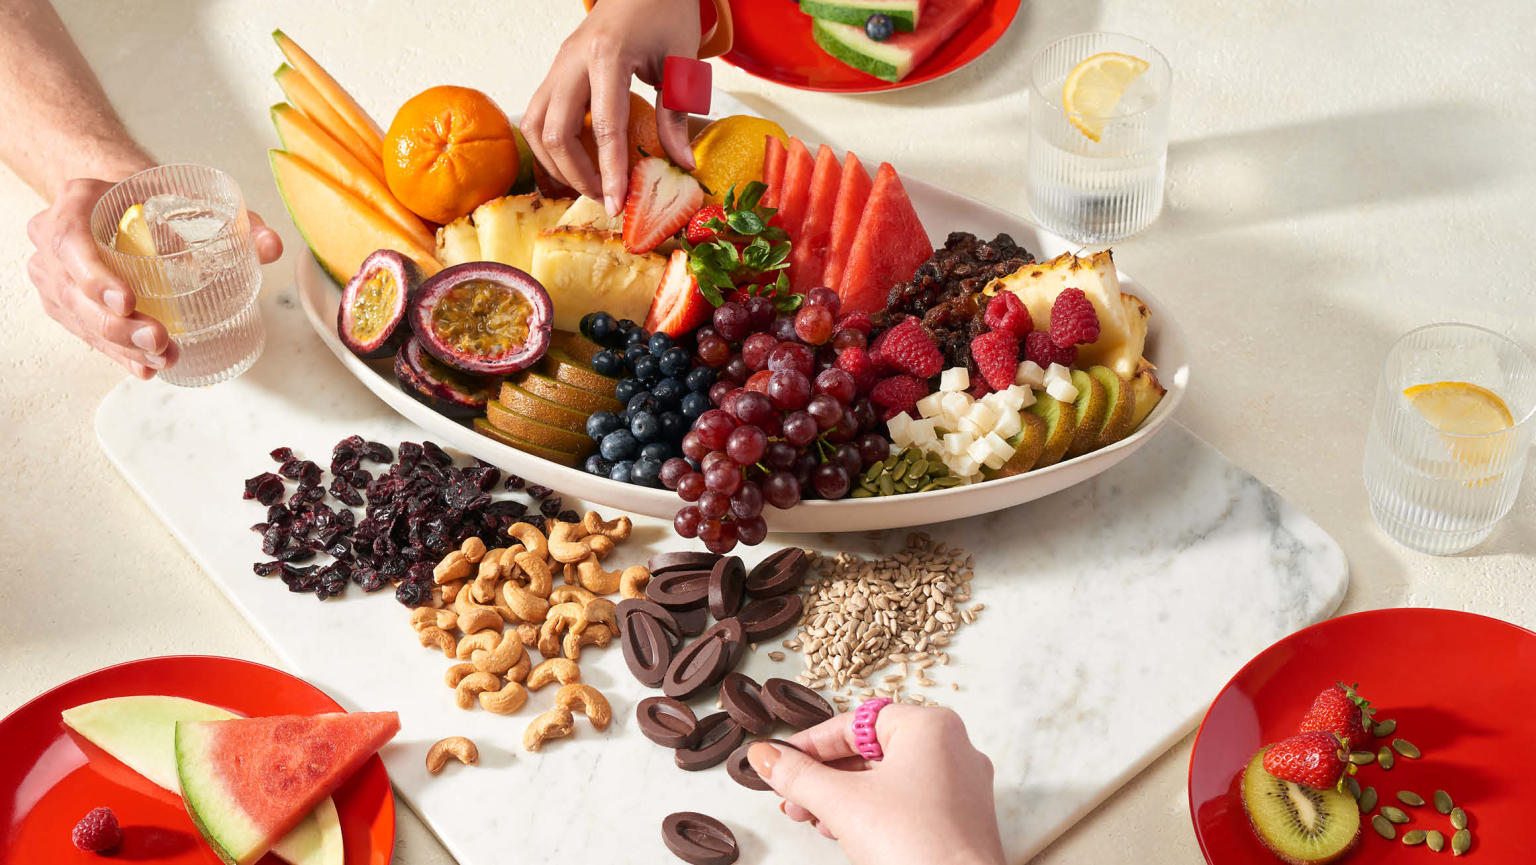 An appetising assortment of fruits and nuts arranged on platter on top of a stylish marble board on a table, surrounded by three red plates with fruit on them, with three hands reaching out to grab a variety of delectable items, including a refreshing drink. 